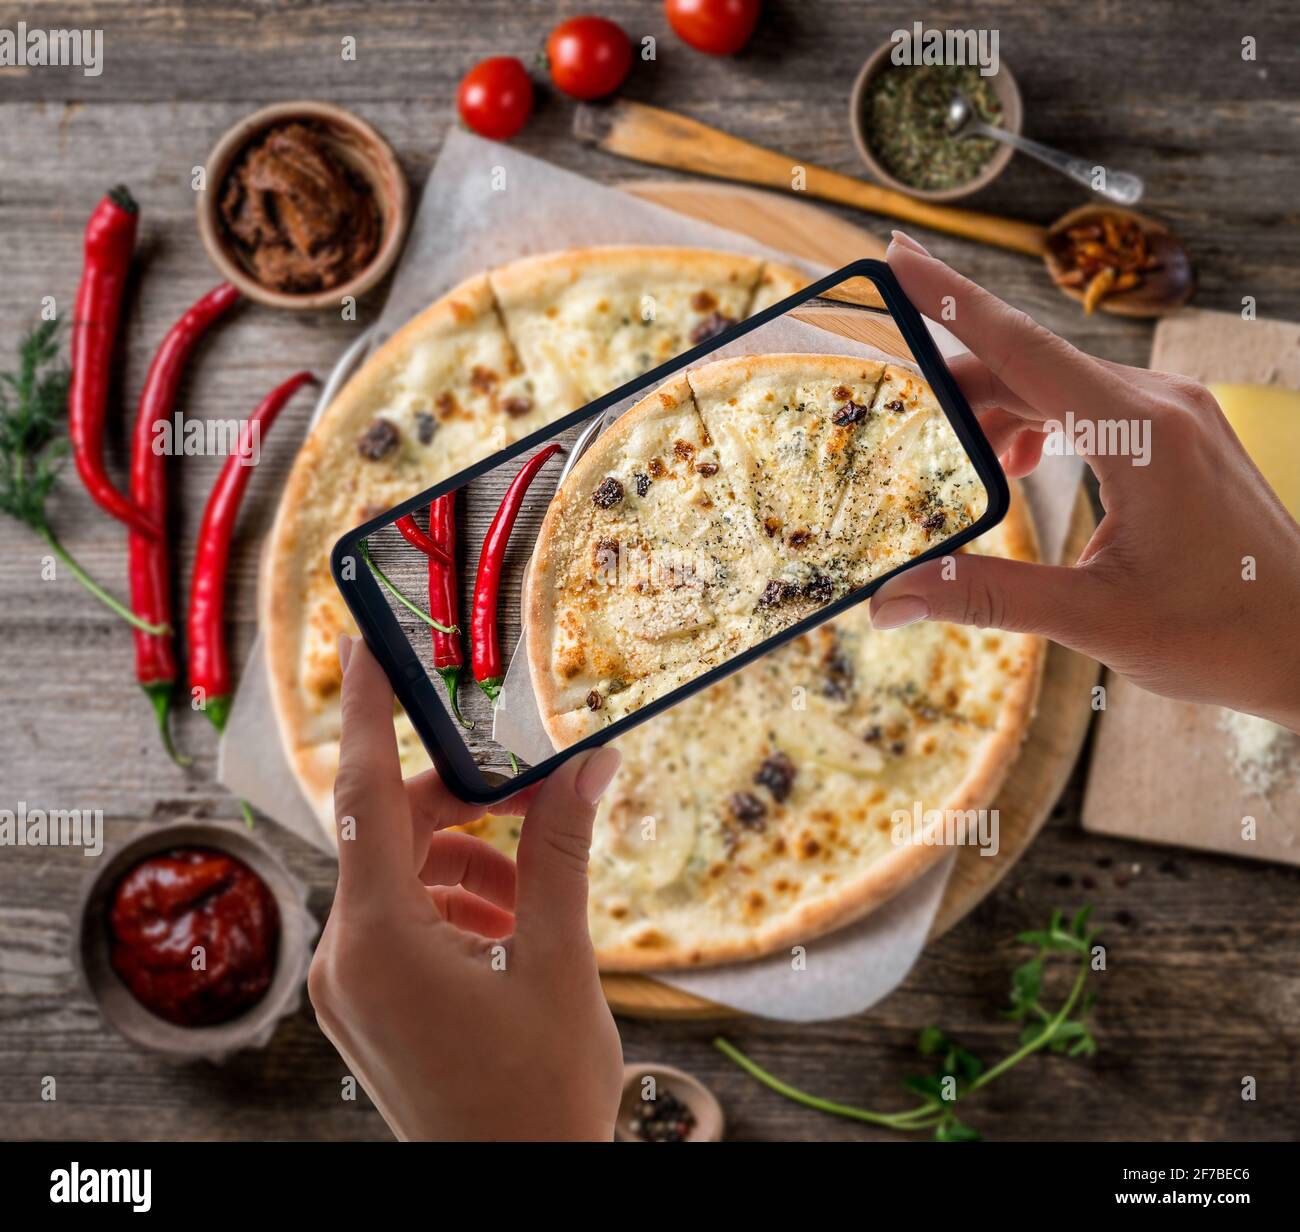 Delicious pizza with nuts and pears, topview Stock Photo